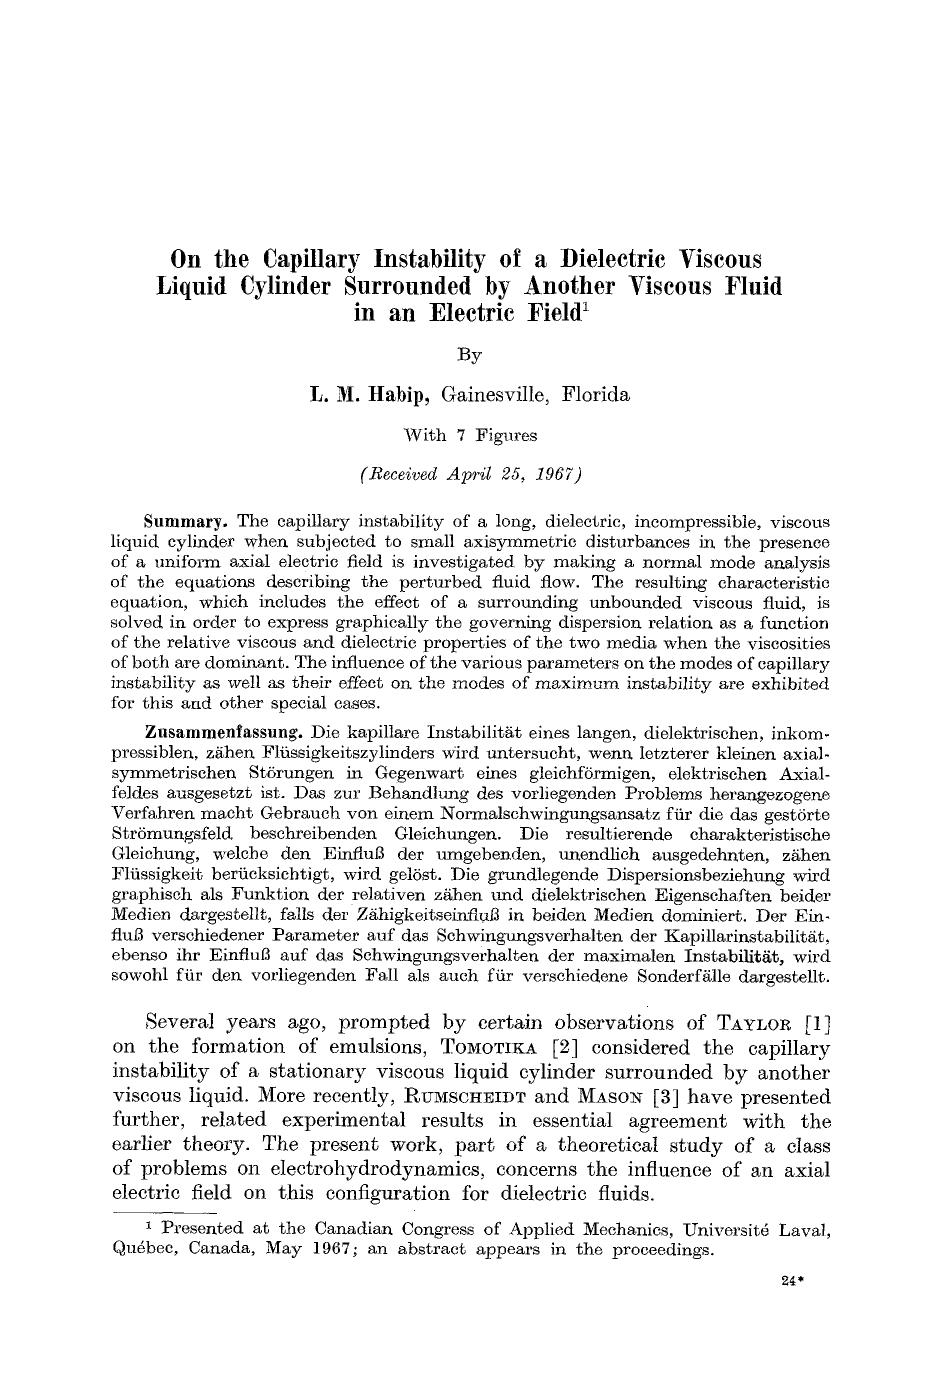 On the capillary instability of a dielectric viscous liquid cylinder surrounded by another viscous fluid in an electric field by Unknown